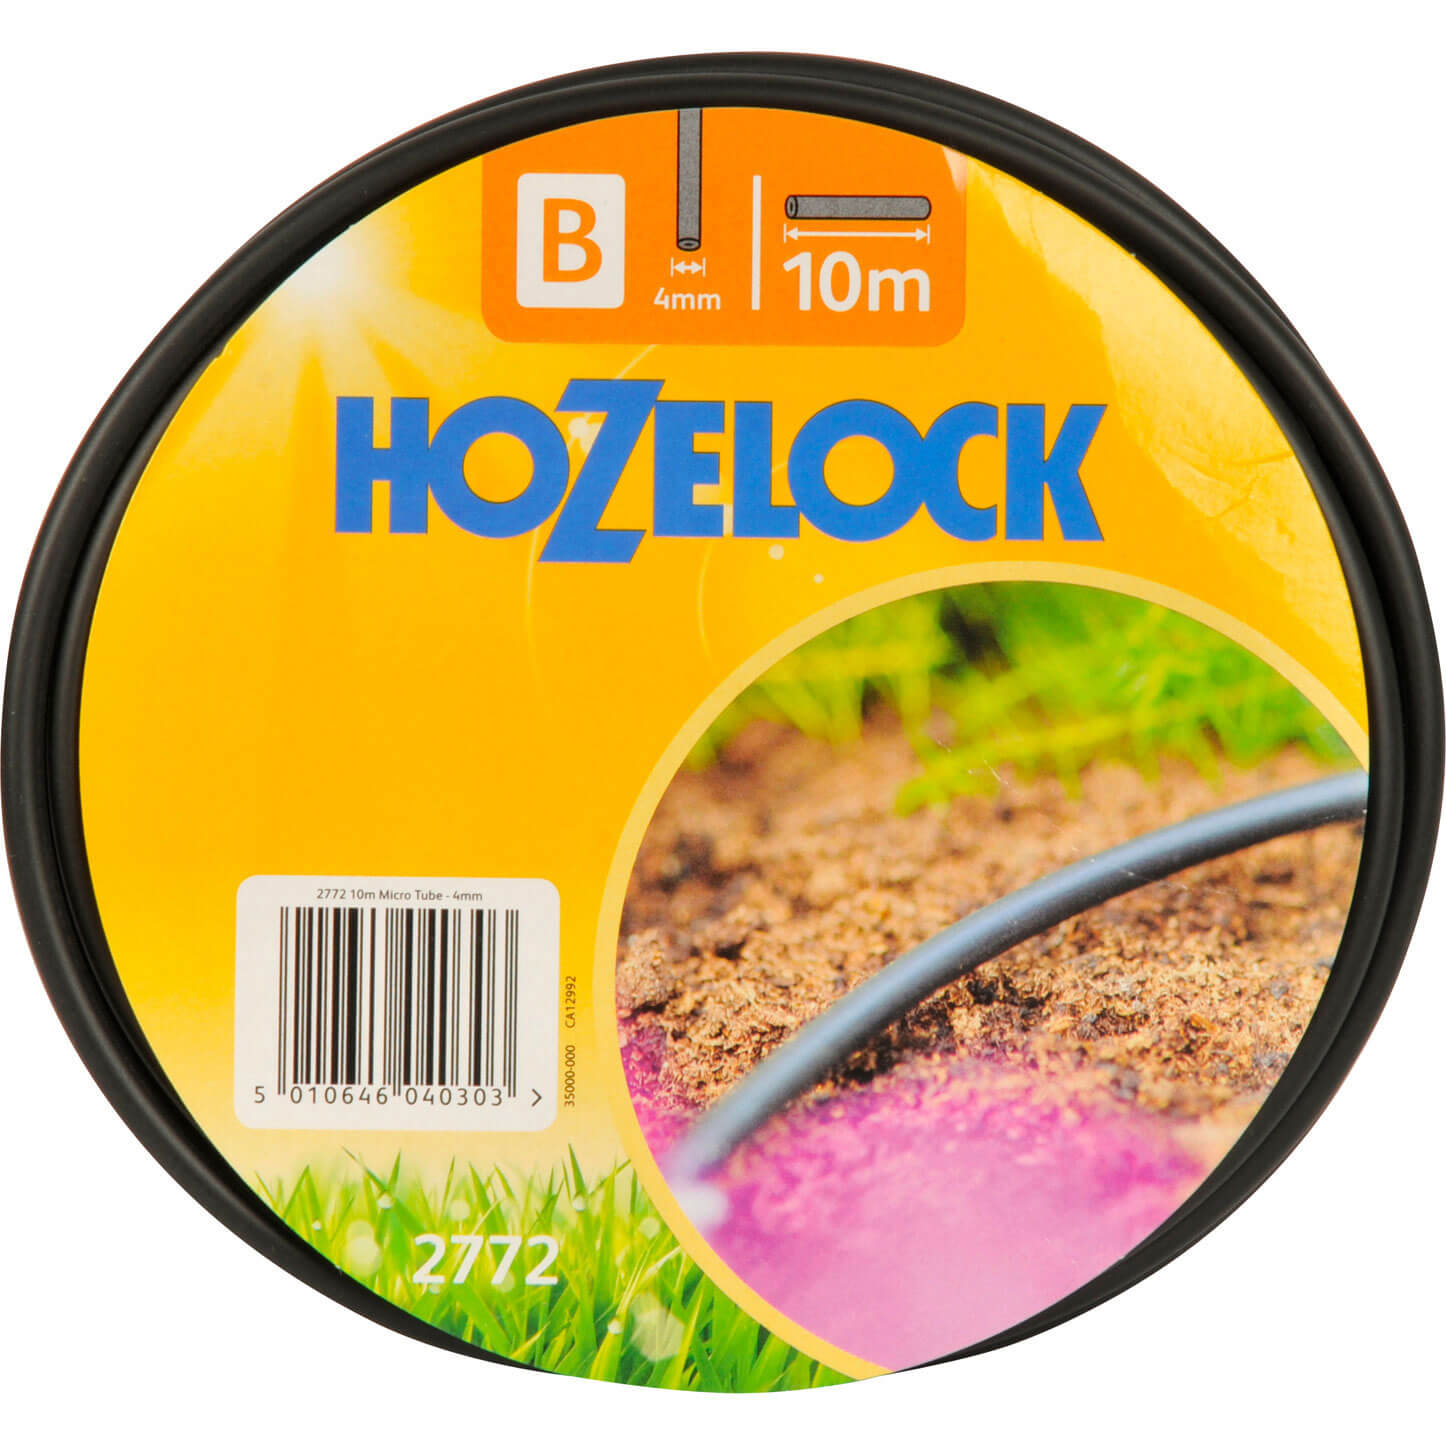 Hozelock MICRO Connecting Irrigation Hose Pipe 5/32" / 4mm 10m